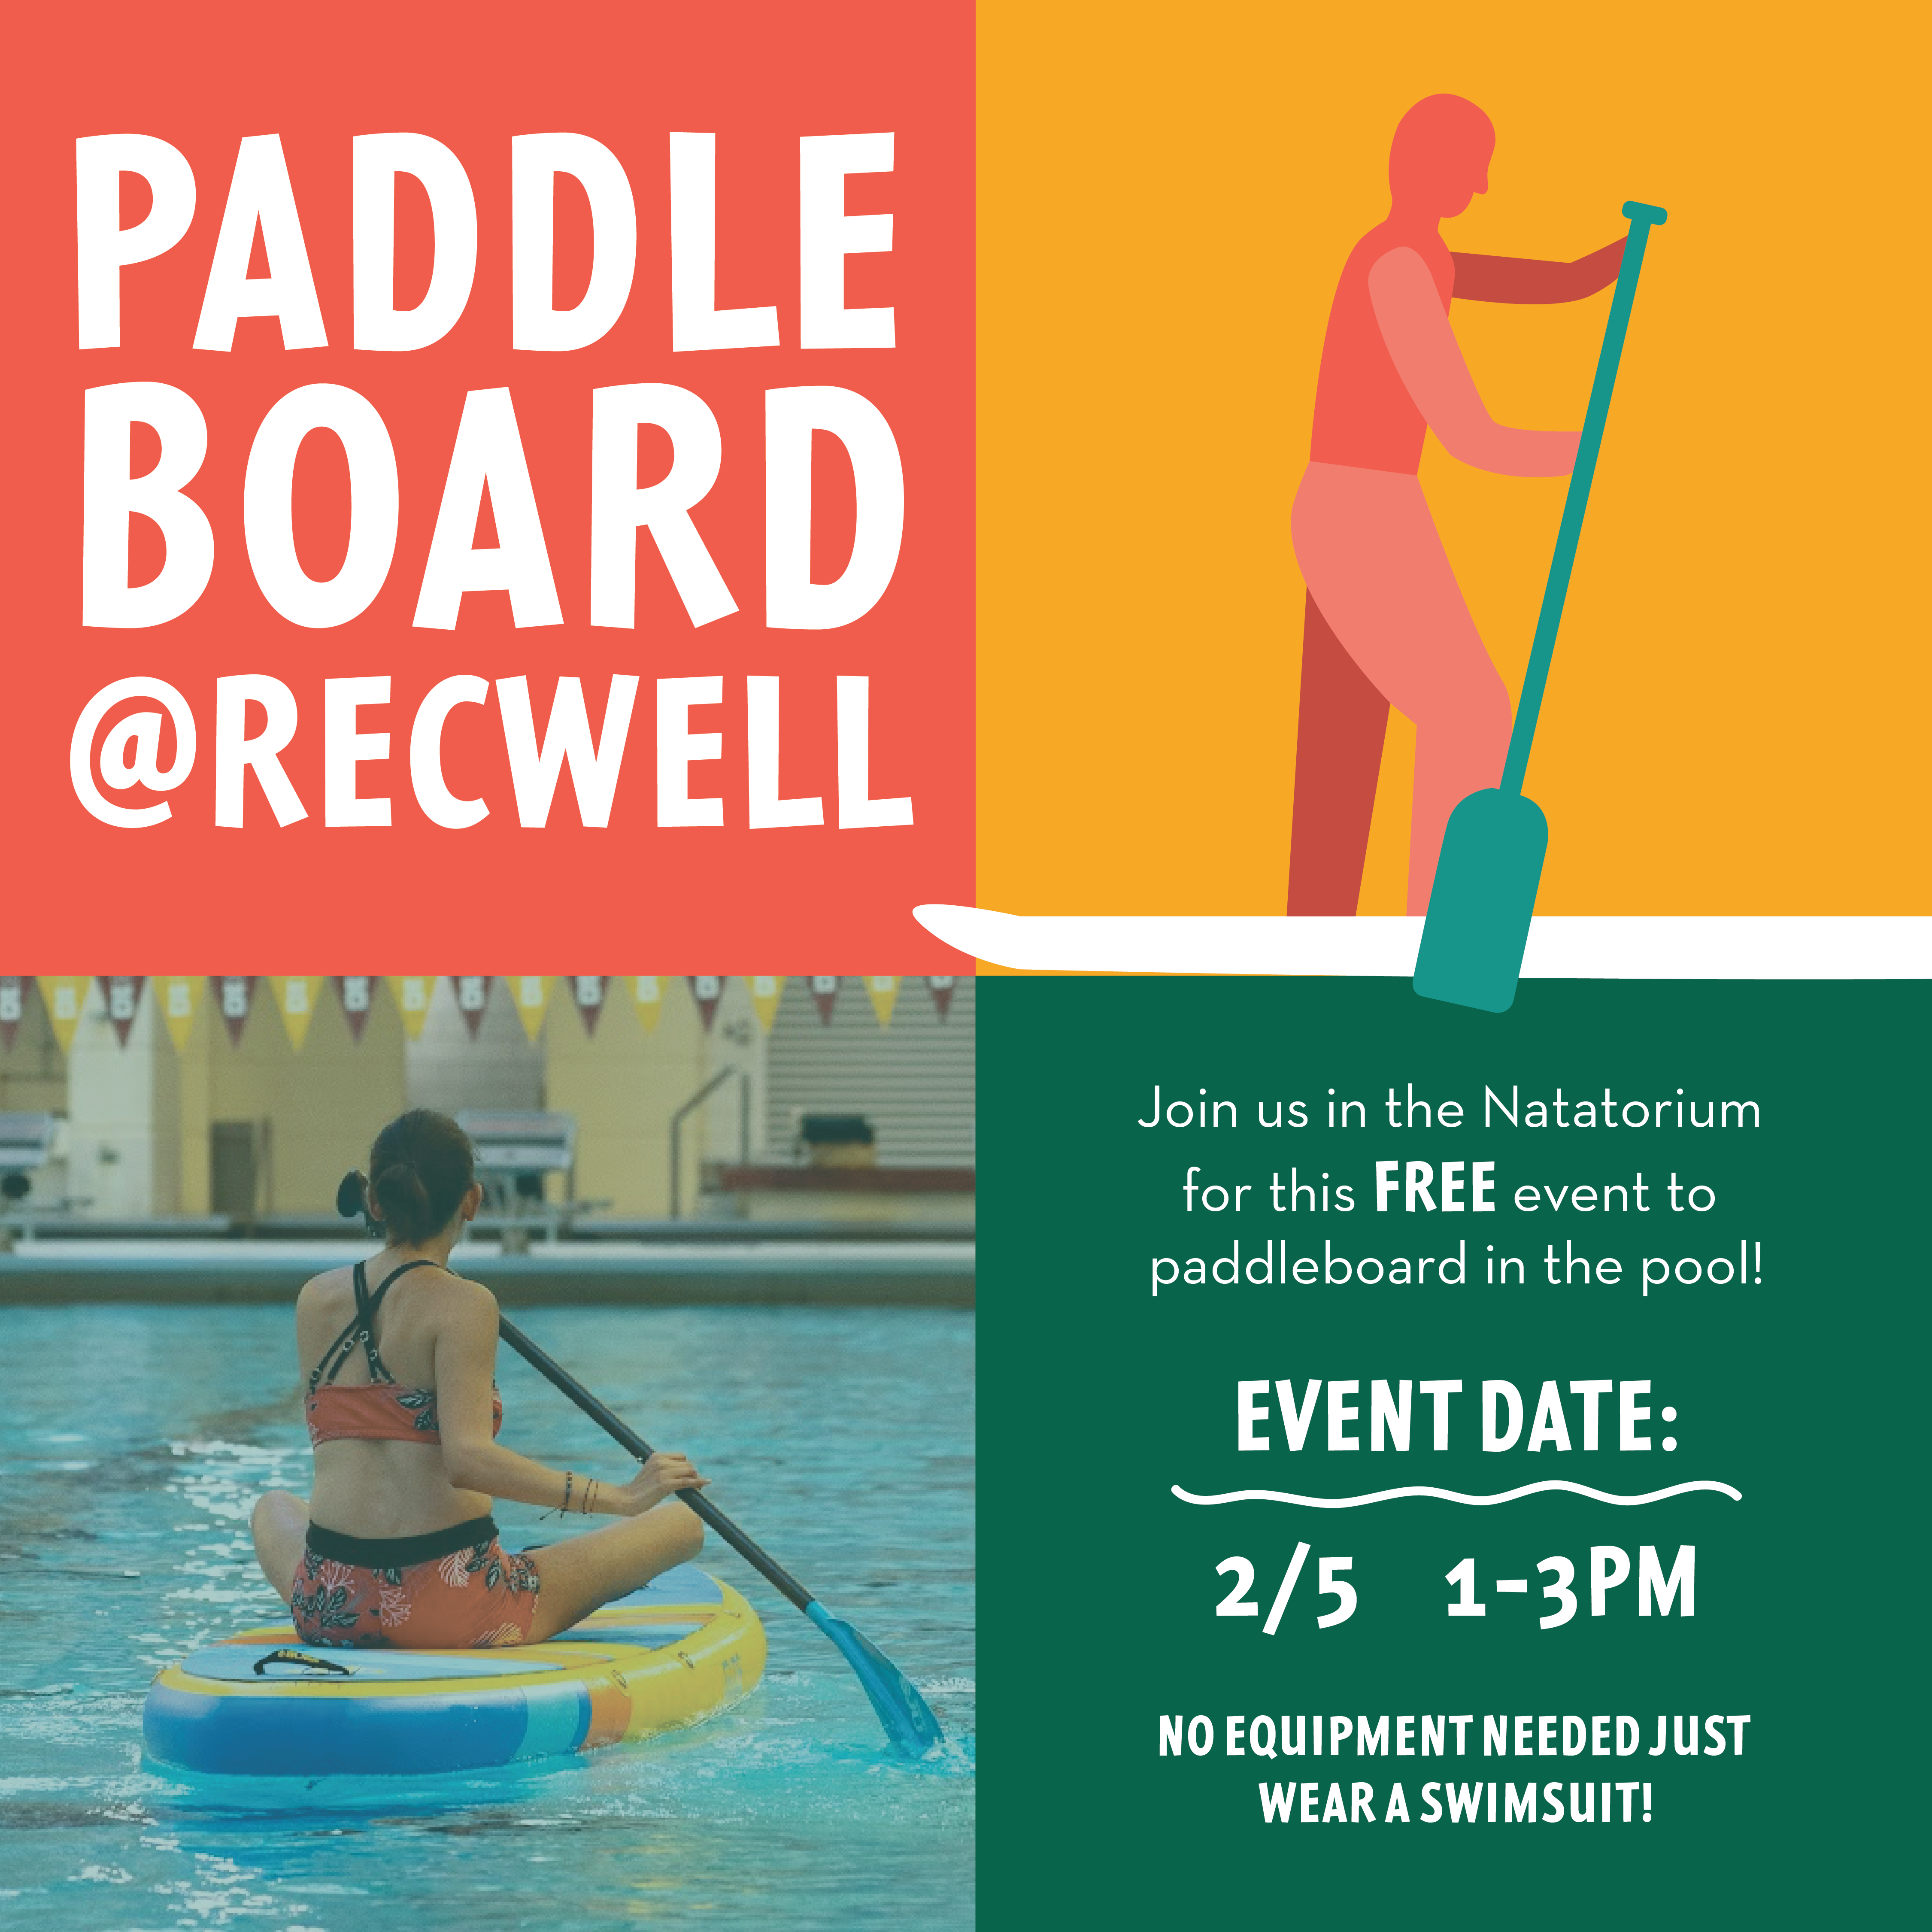 graphic promoting the paddle boarding events at RecWell with an illustration and image from a previous event